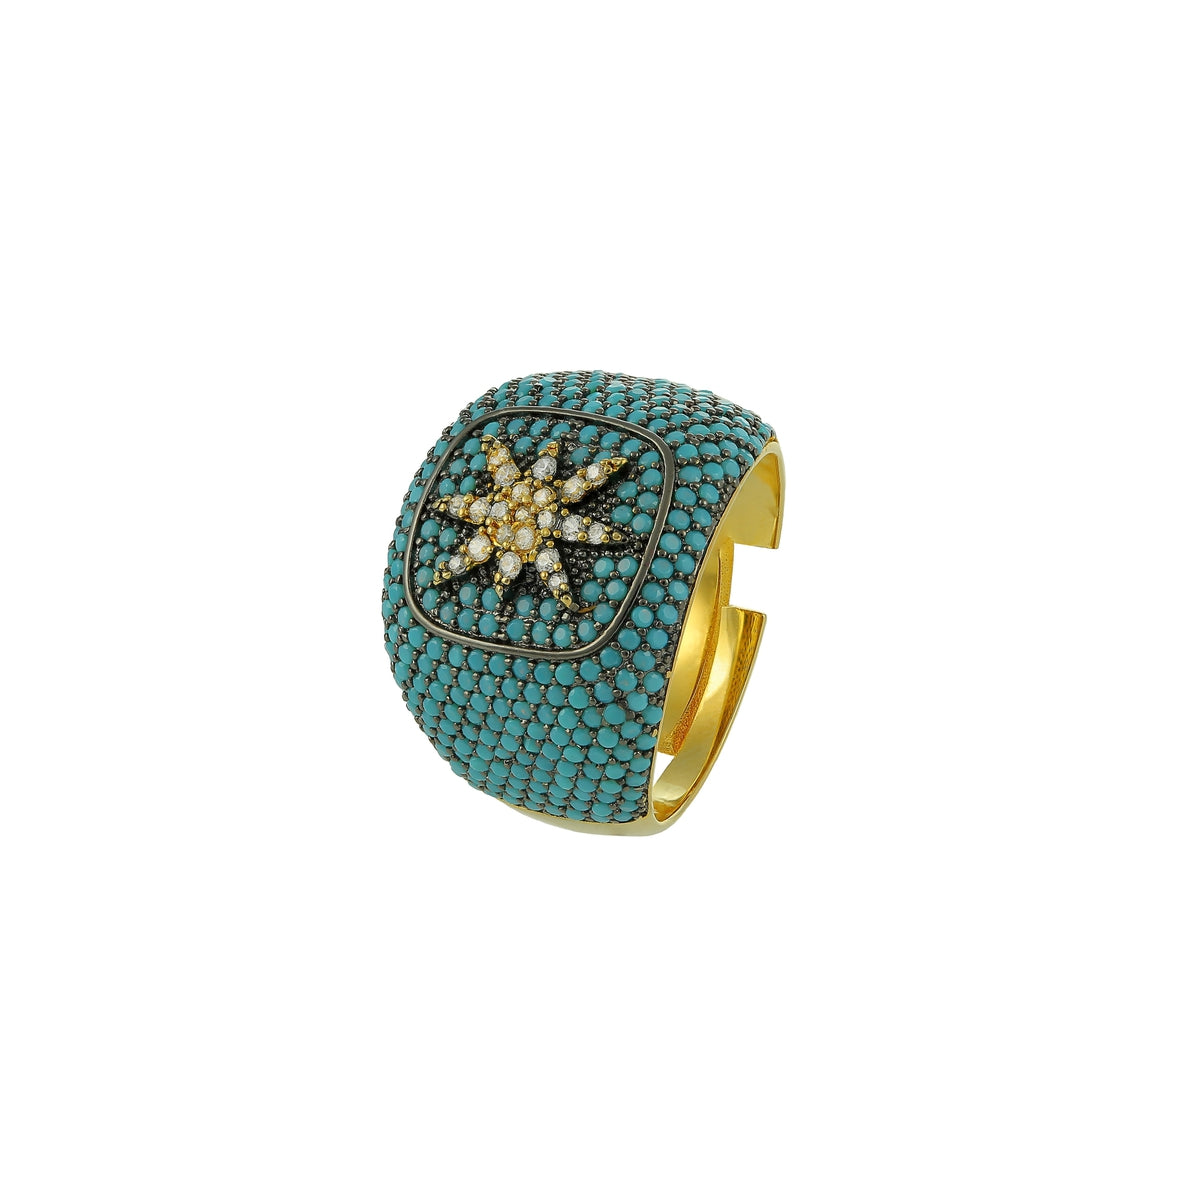 Central Star Pinky Ring